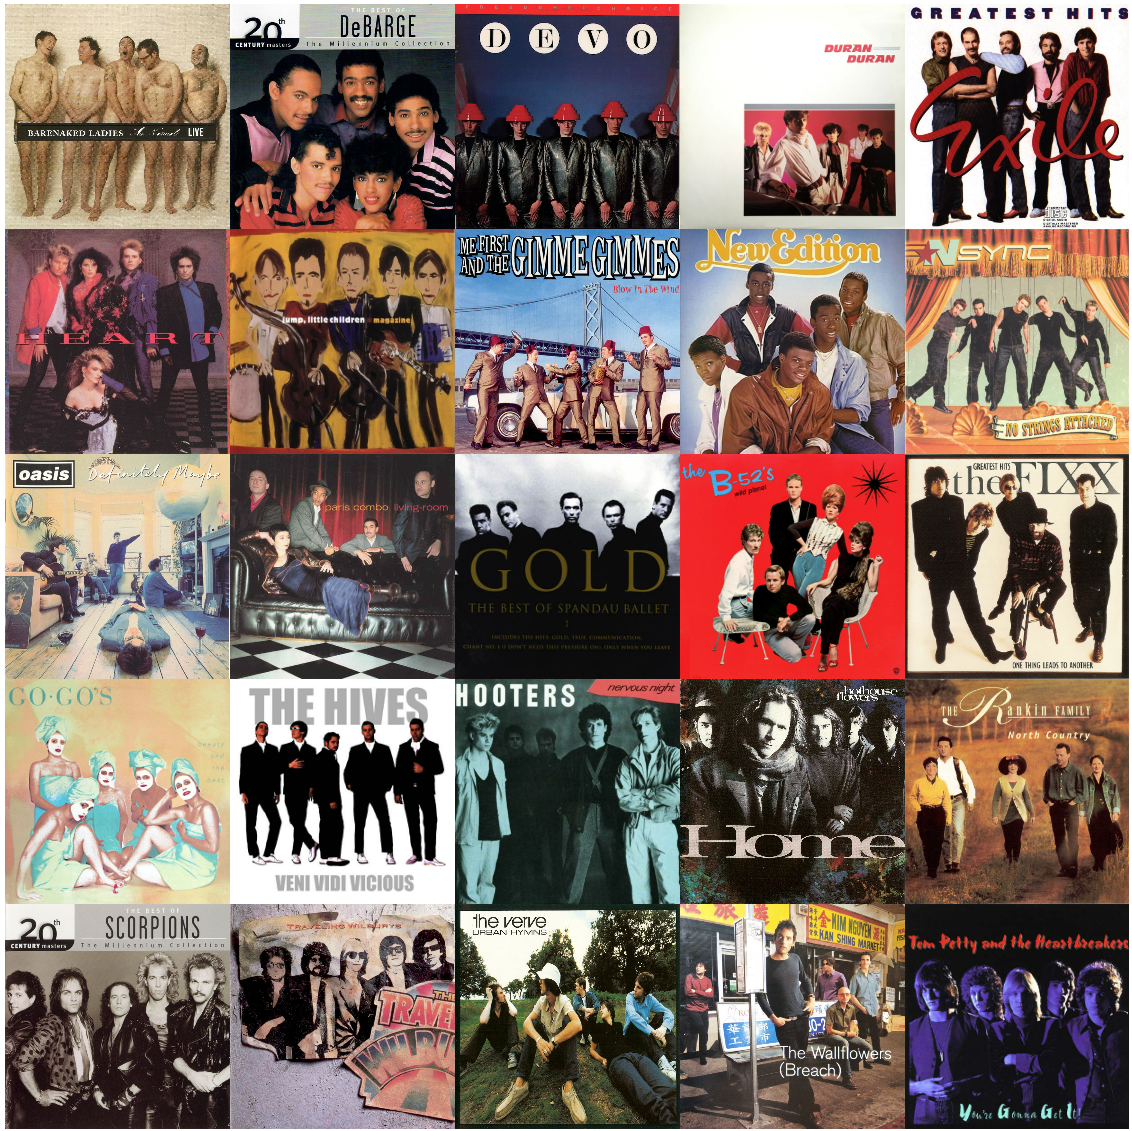 Friends  Songs, Music album covers, Music collage